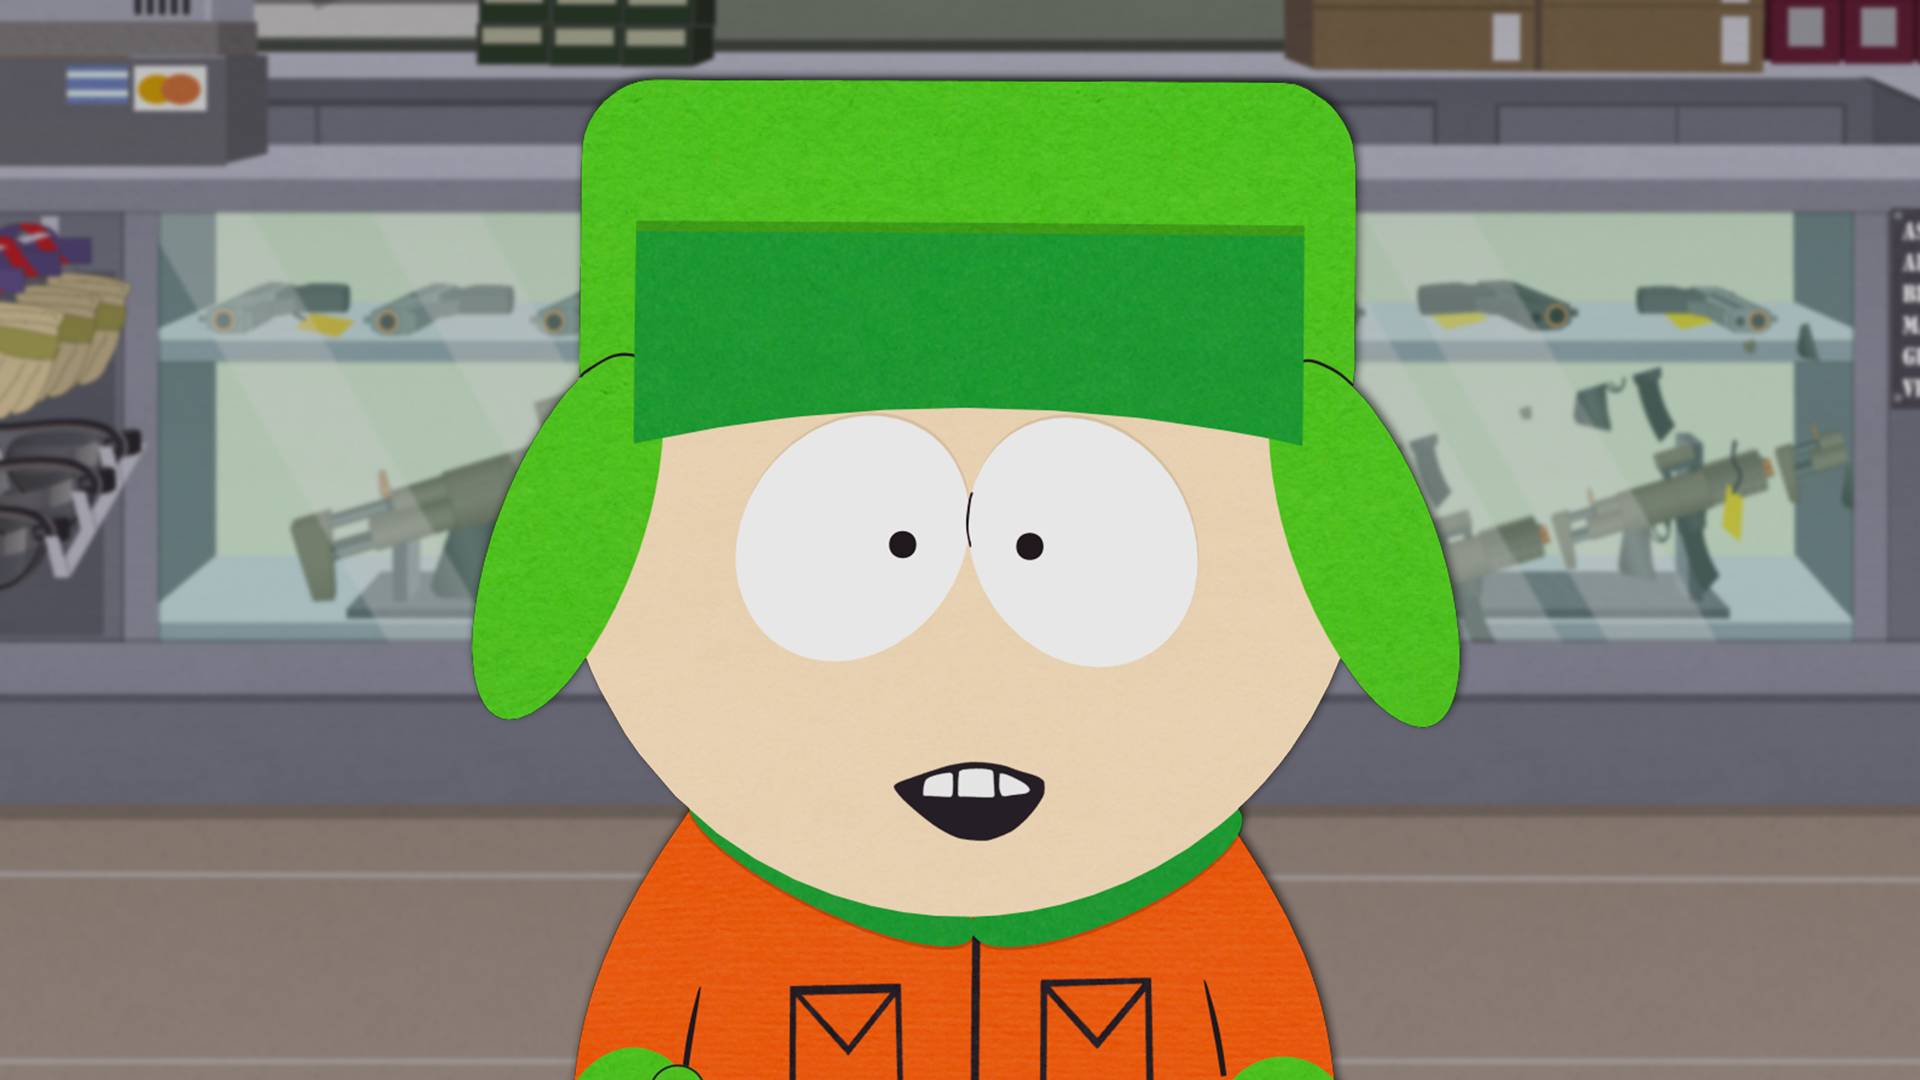 South Park season 25 episode one is stuck in a rut